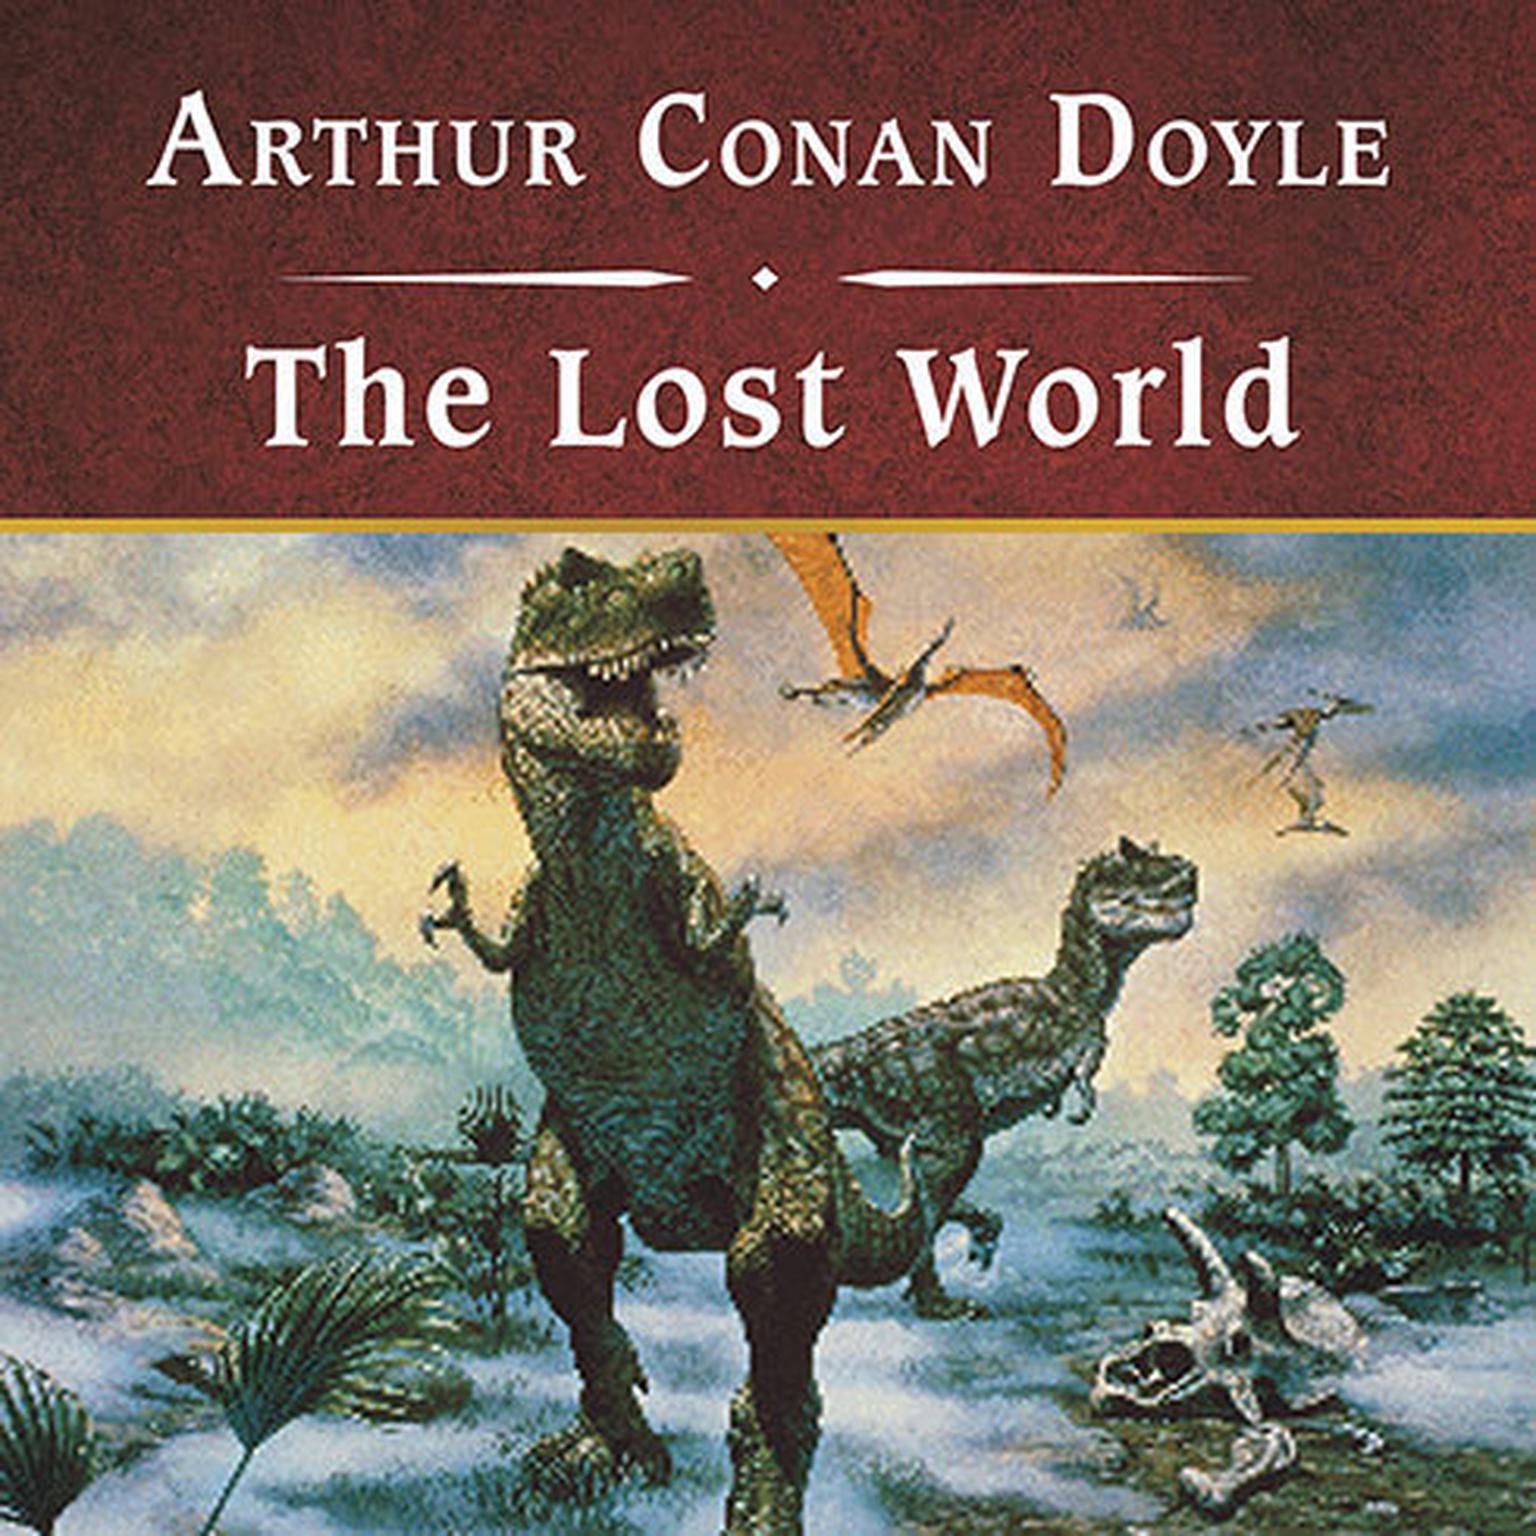 The Lost World, with eBook Audiobook, by Arthur Conan Doyle